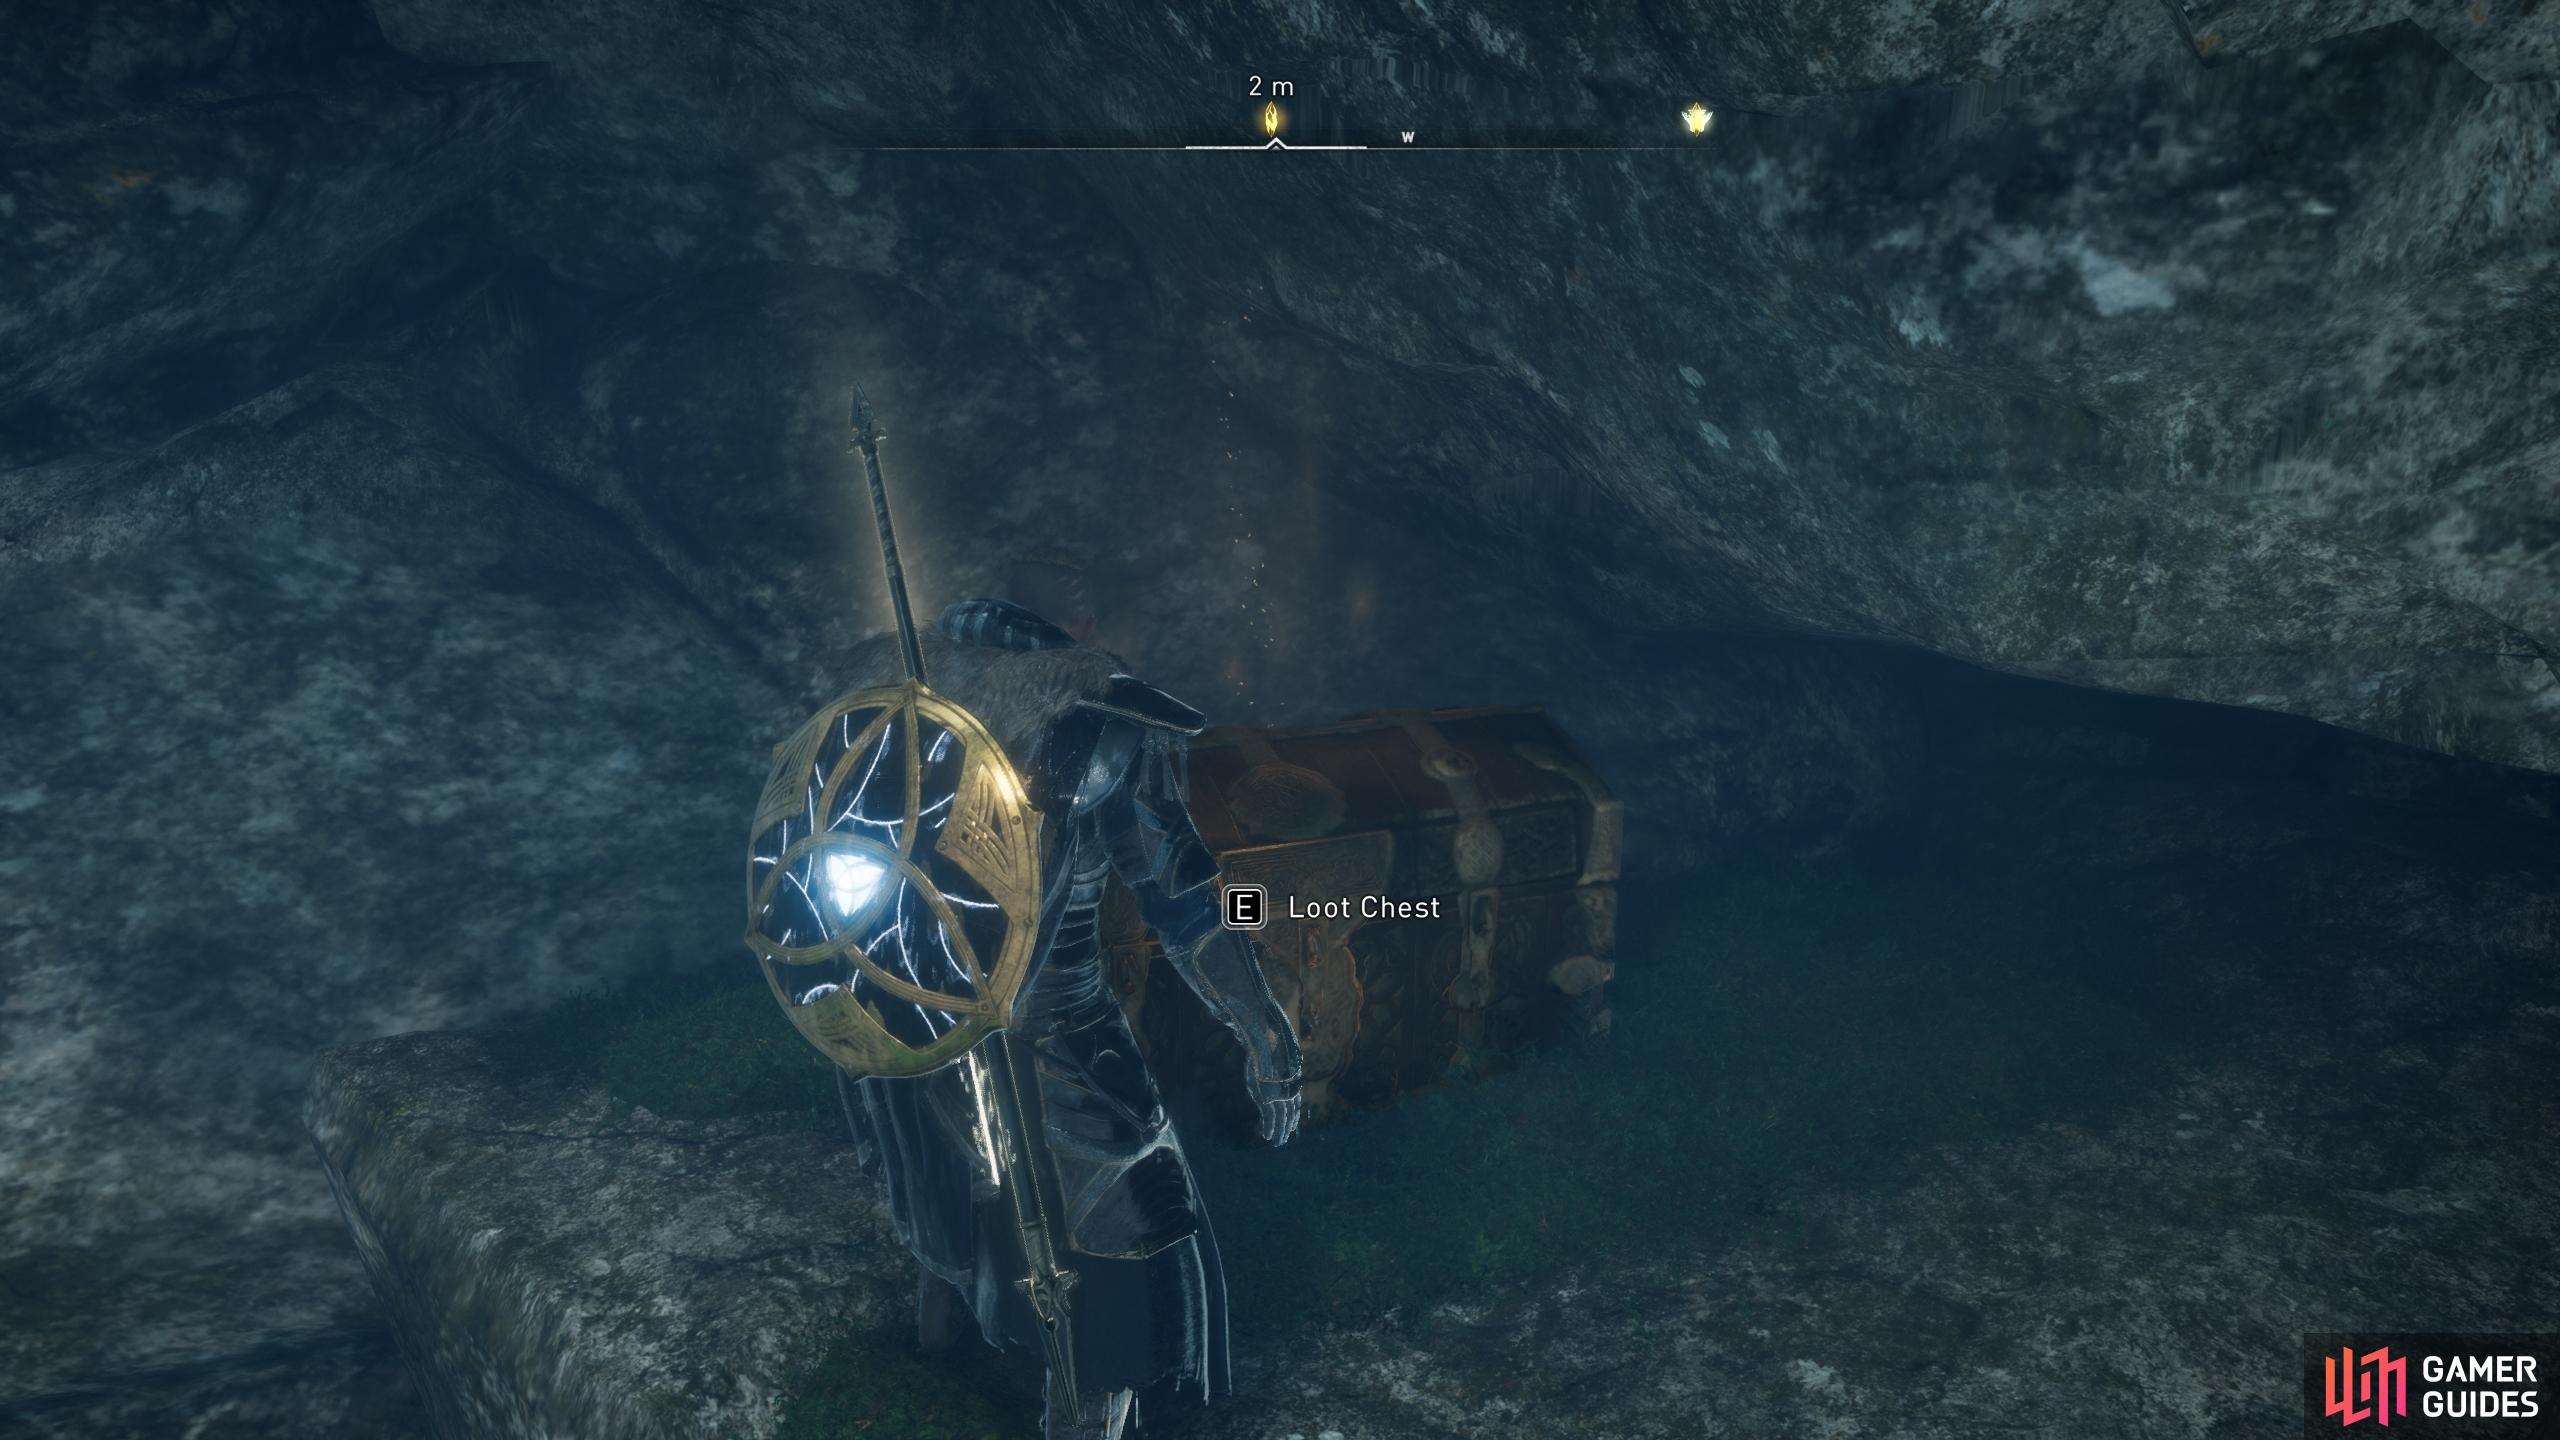 Loot the chest within the hidden chamber for the second Ymir's Tear Stone in the Well of Urdr.